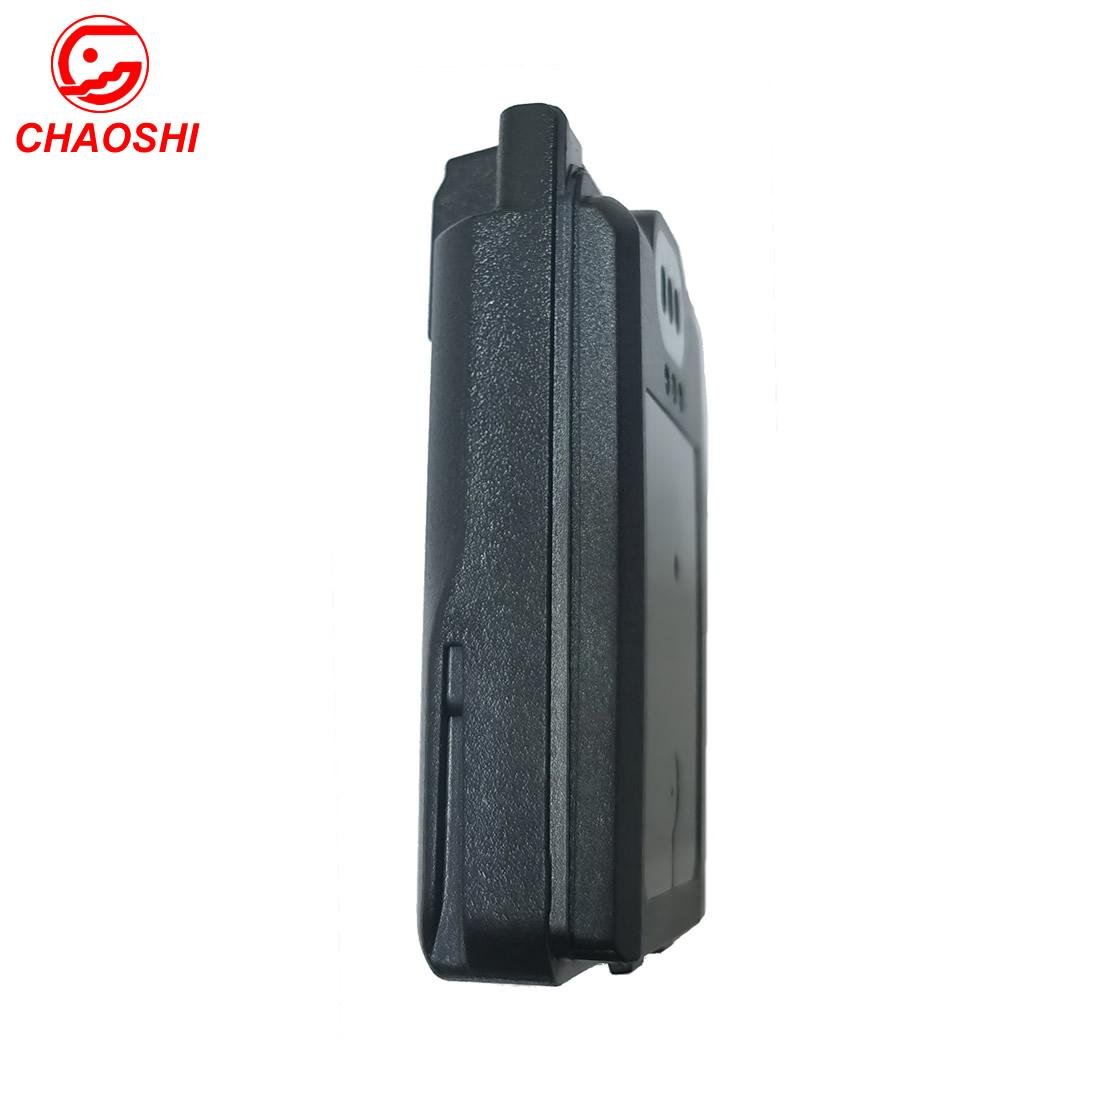 BP294 Battery For walkie talkie IC-F52D, IC-F62D, IC-M85 4